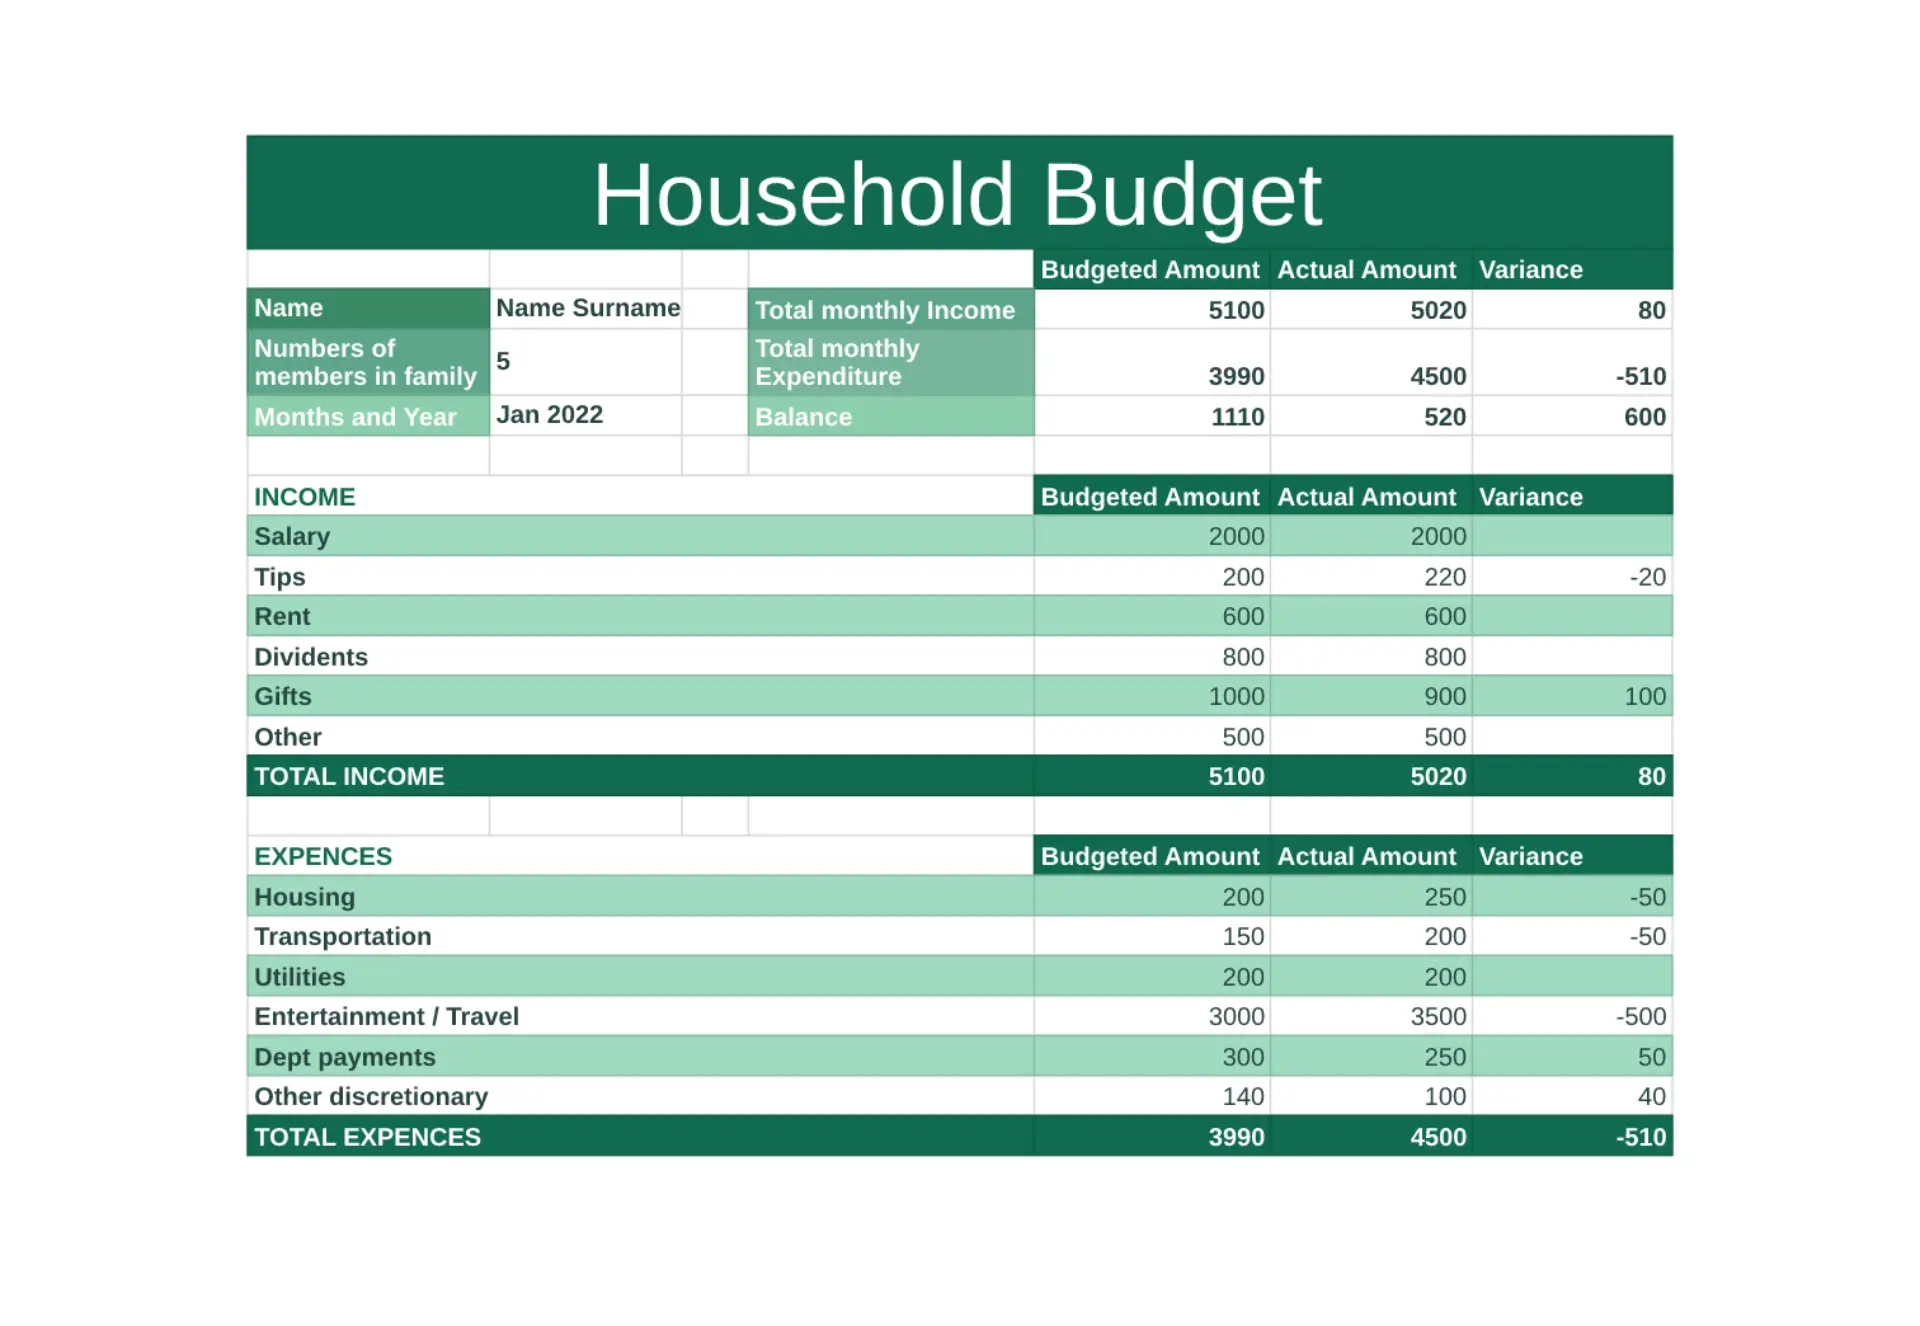 Household Budget Template for Google Sheets